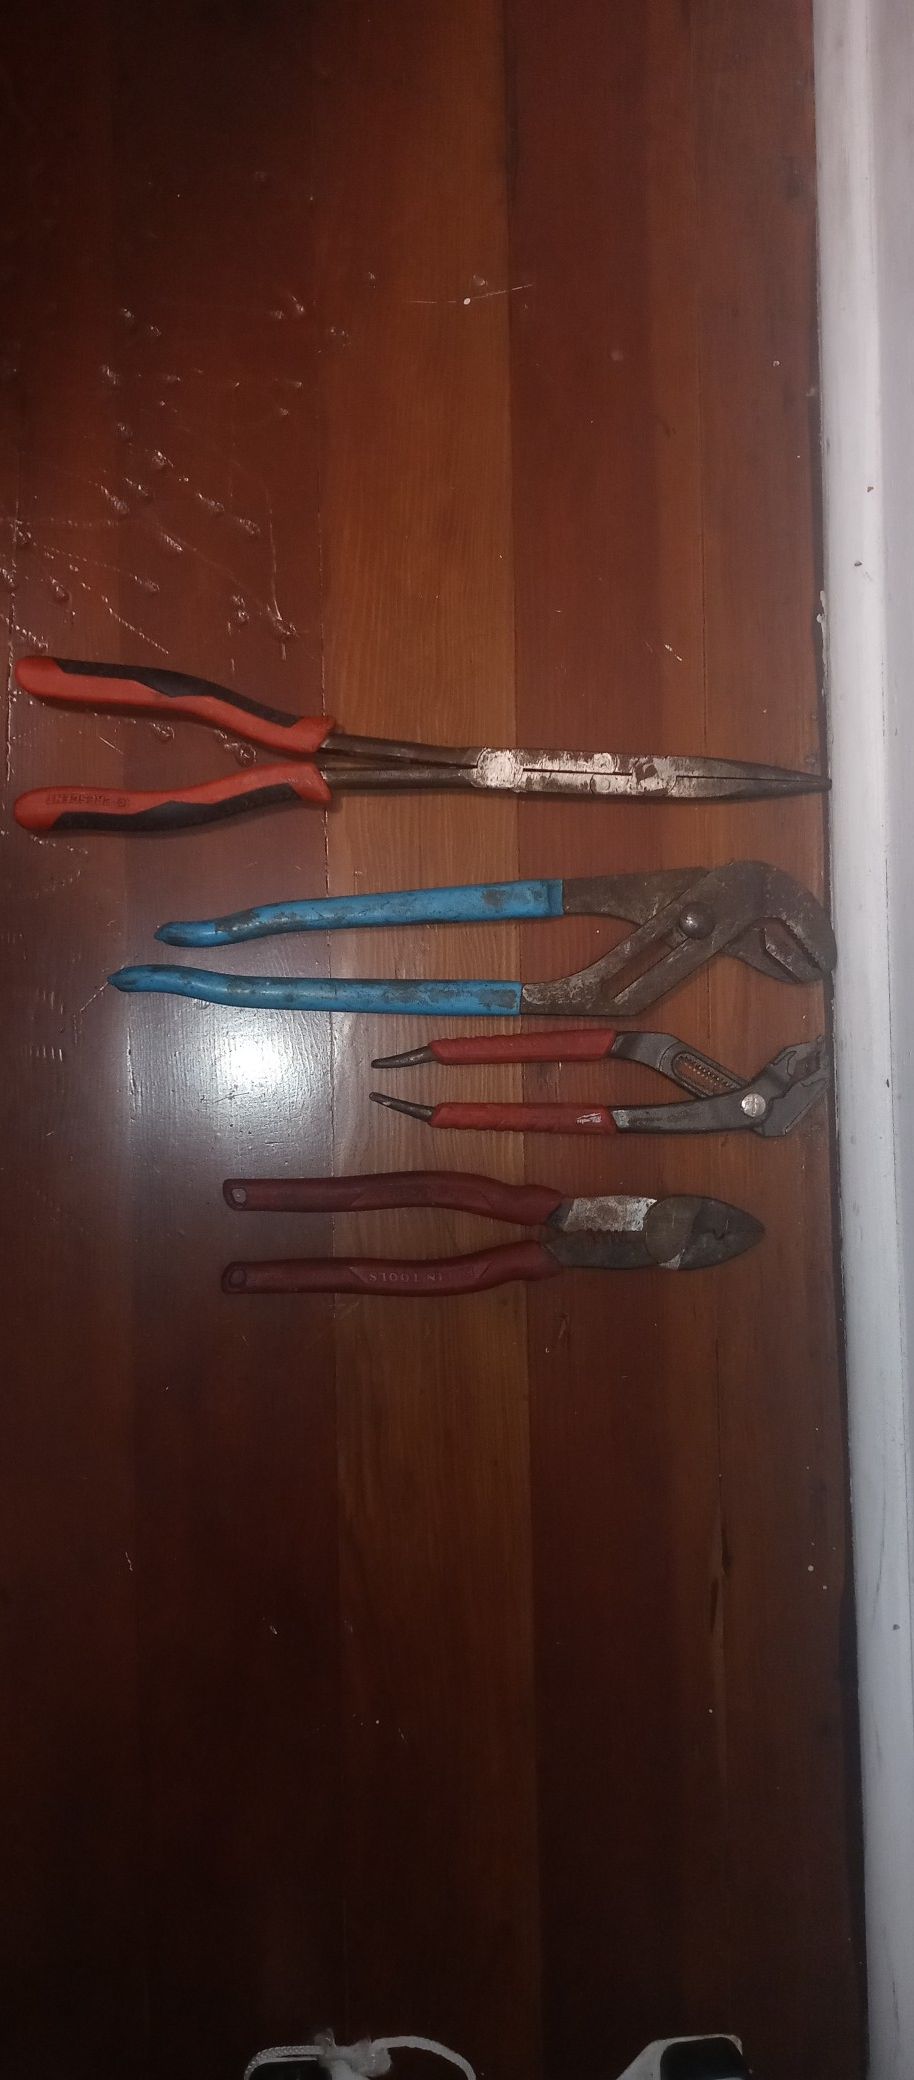 4 misc. tools: pliers and adjustable wrenchs